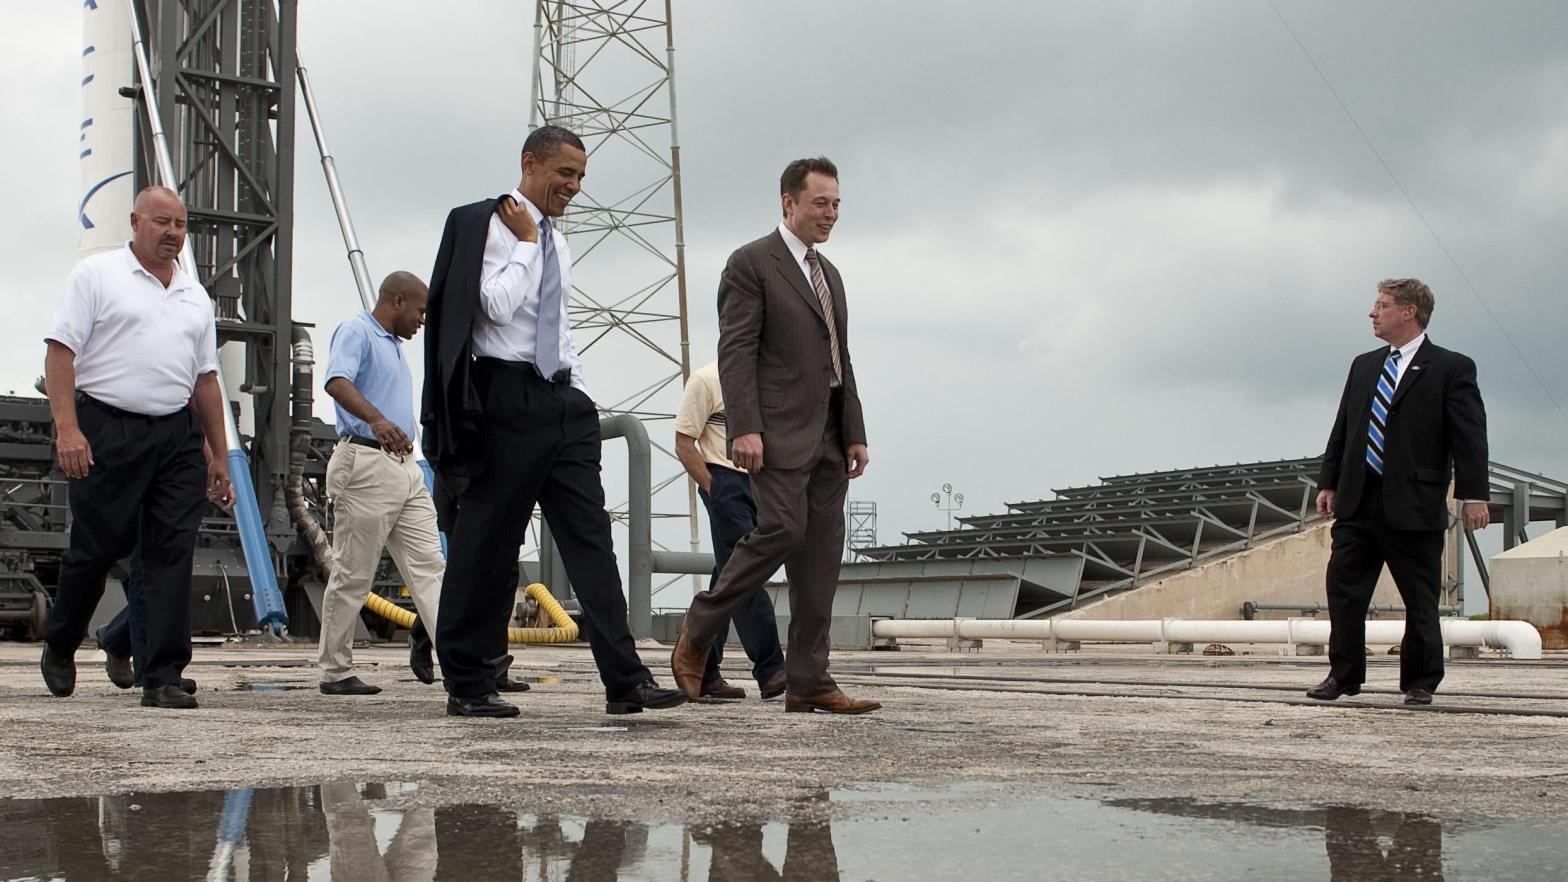 Back when government funding was cool: President Barack Obama and SpaceX CEO Elon Musk touring Cape Canaveral Air Force Station in April 2010. (Photo: NASA/Bill Ingalls)